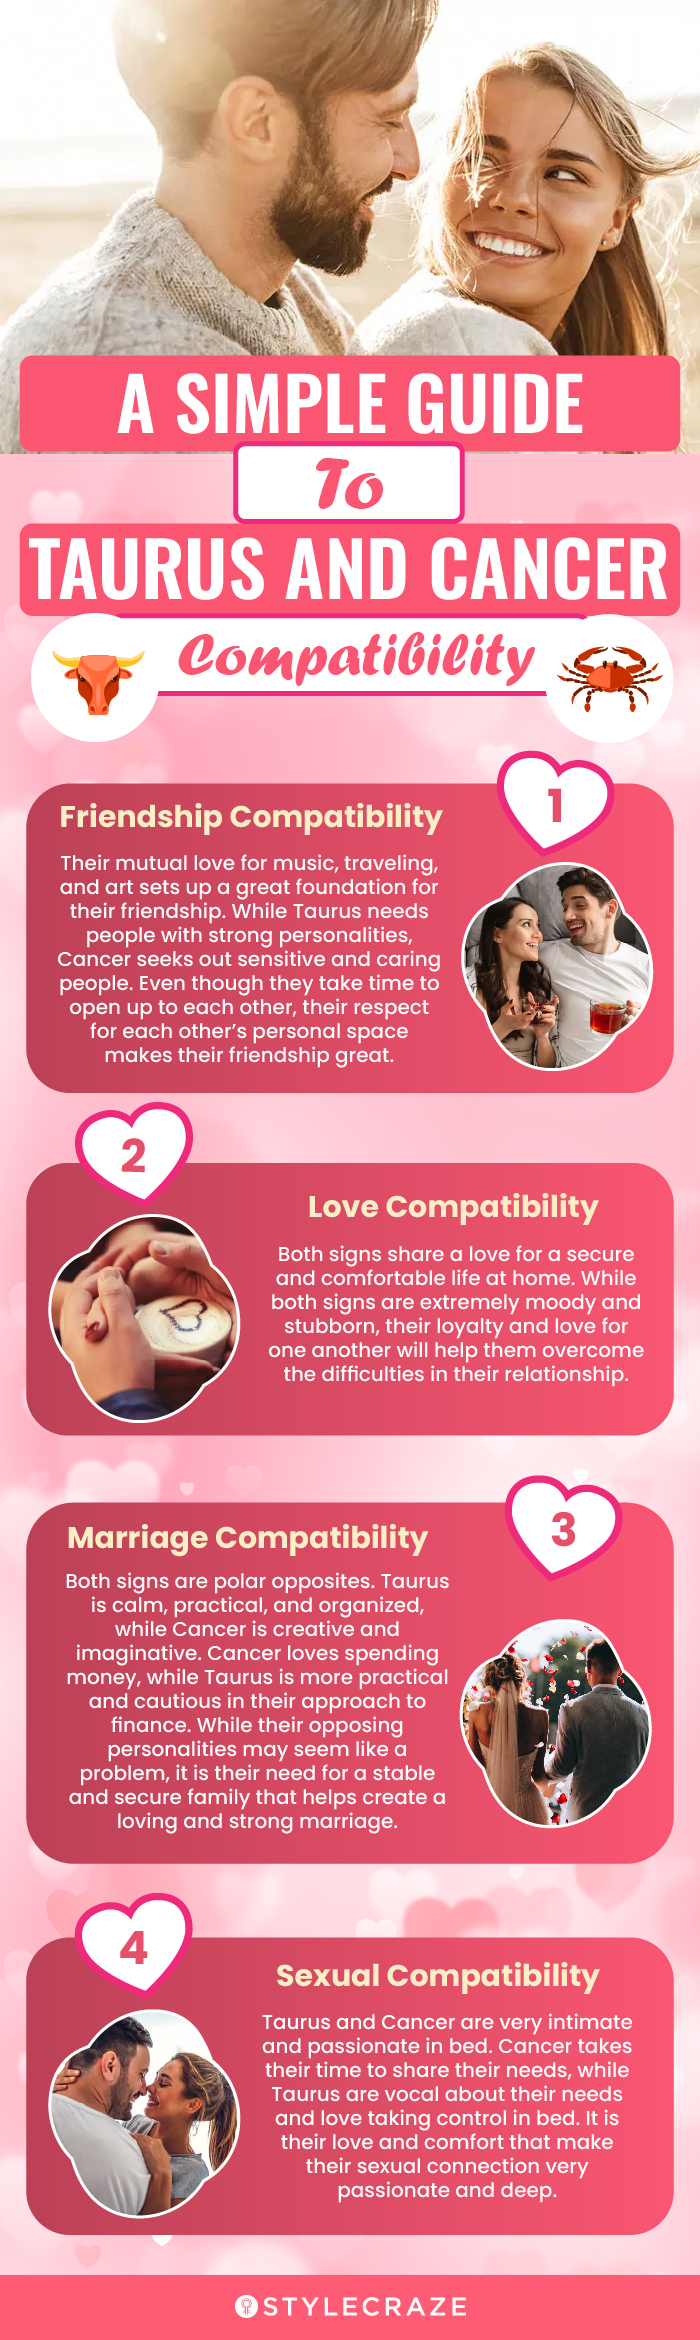 a simple guide to taurus and cancer compatibility (infographic)